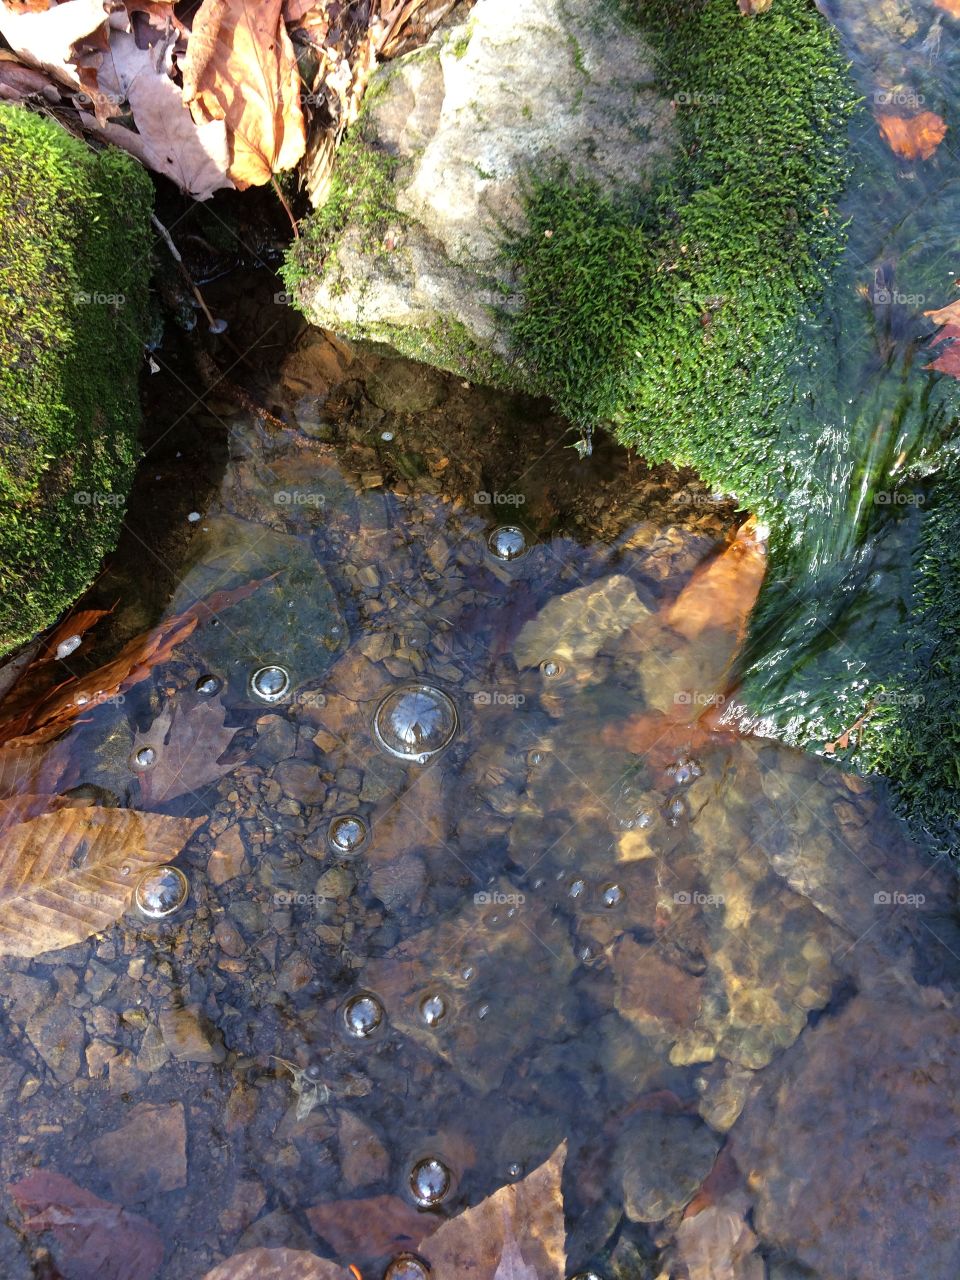 Pool of water from a babbling brook